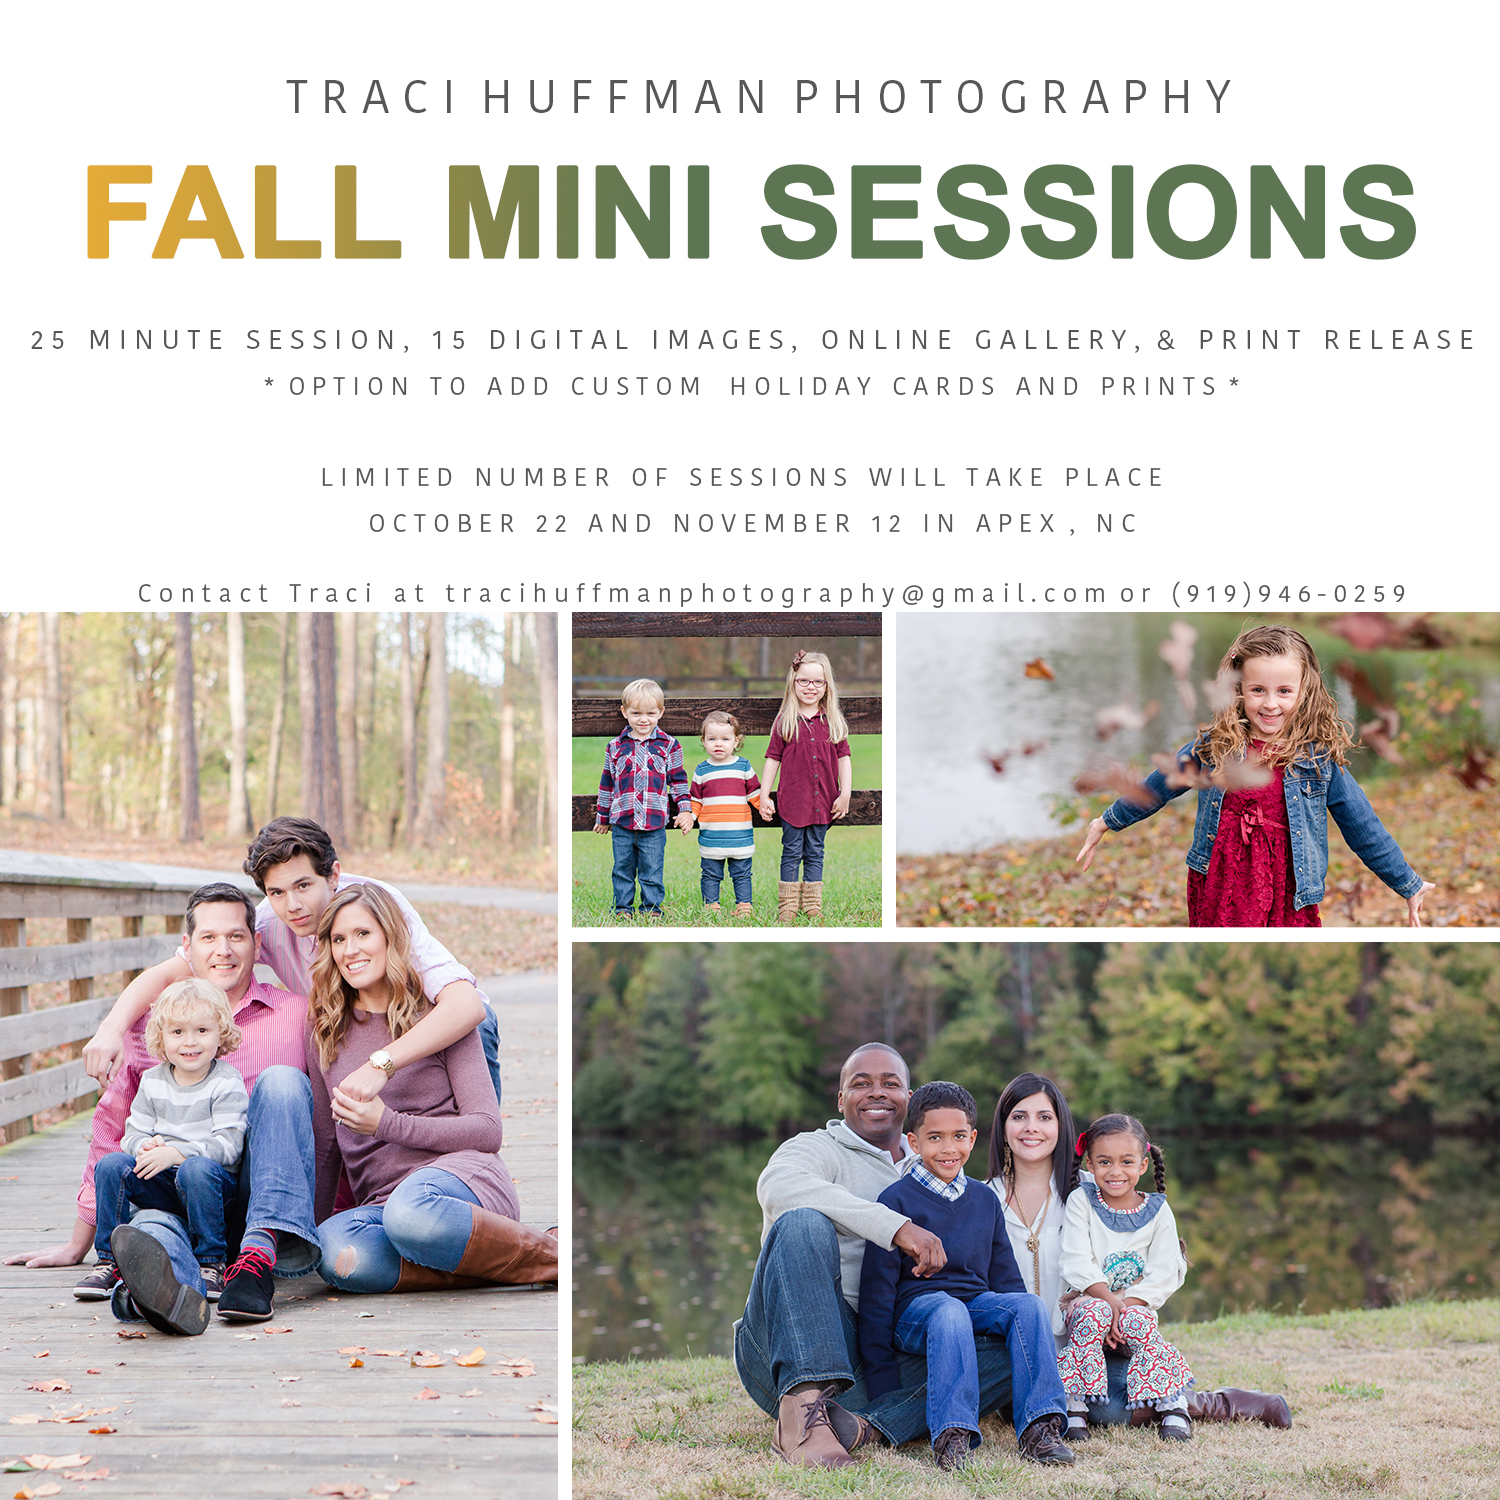 Fall mini photography sessions in Apex, NC with Traci Huffman Photography